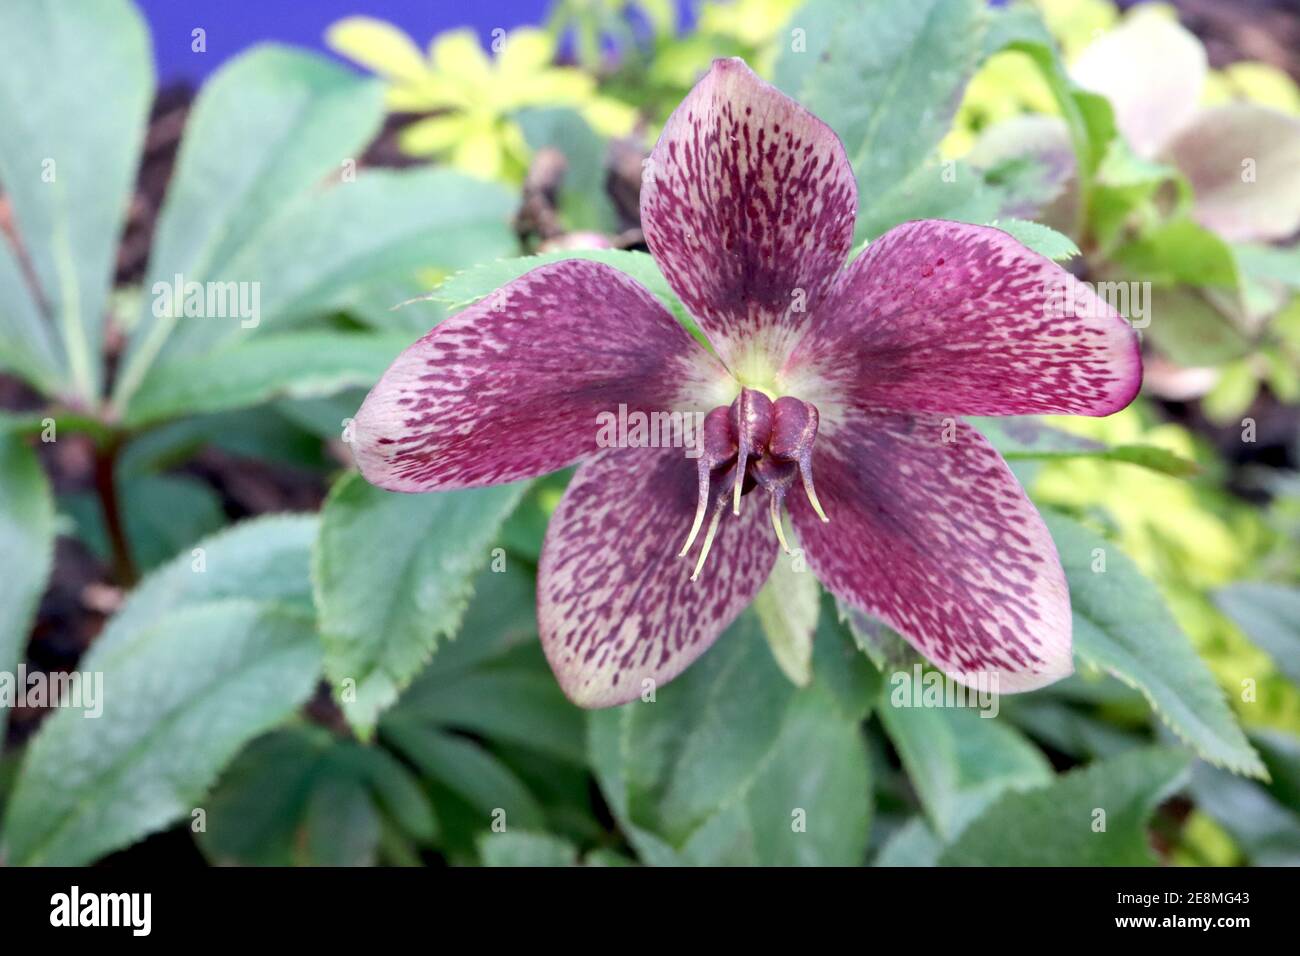 Hellebore x hybridus  Pale brown pink single hellebore with heavily spotted purple freckles January, England, UK Stock Photo